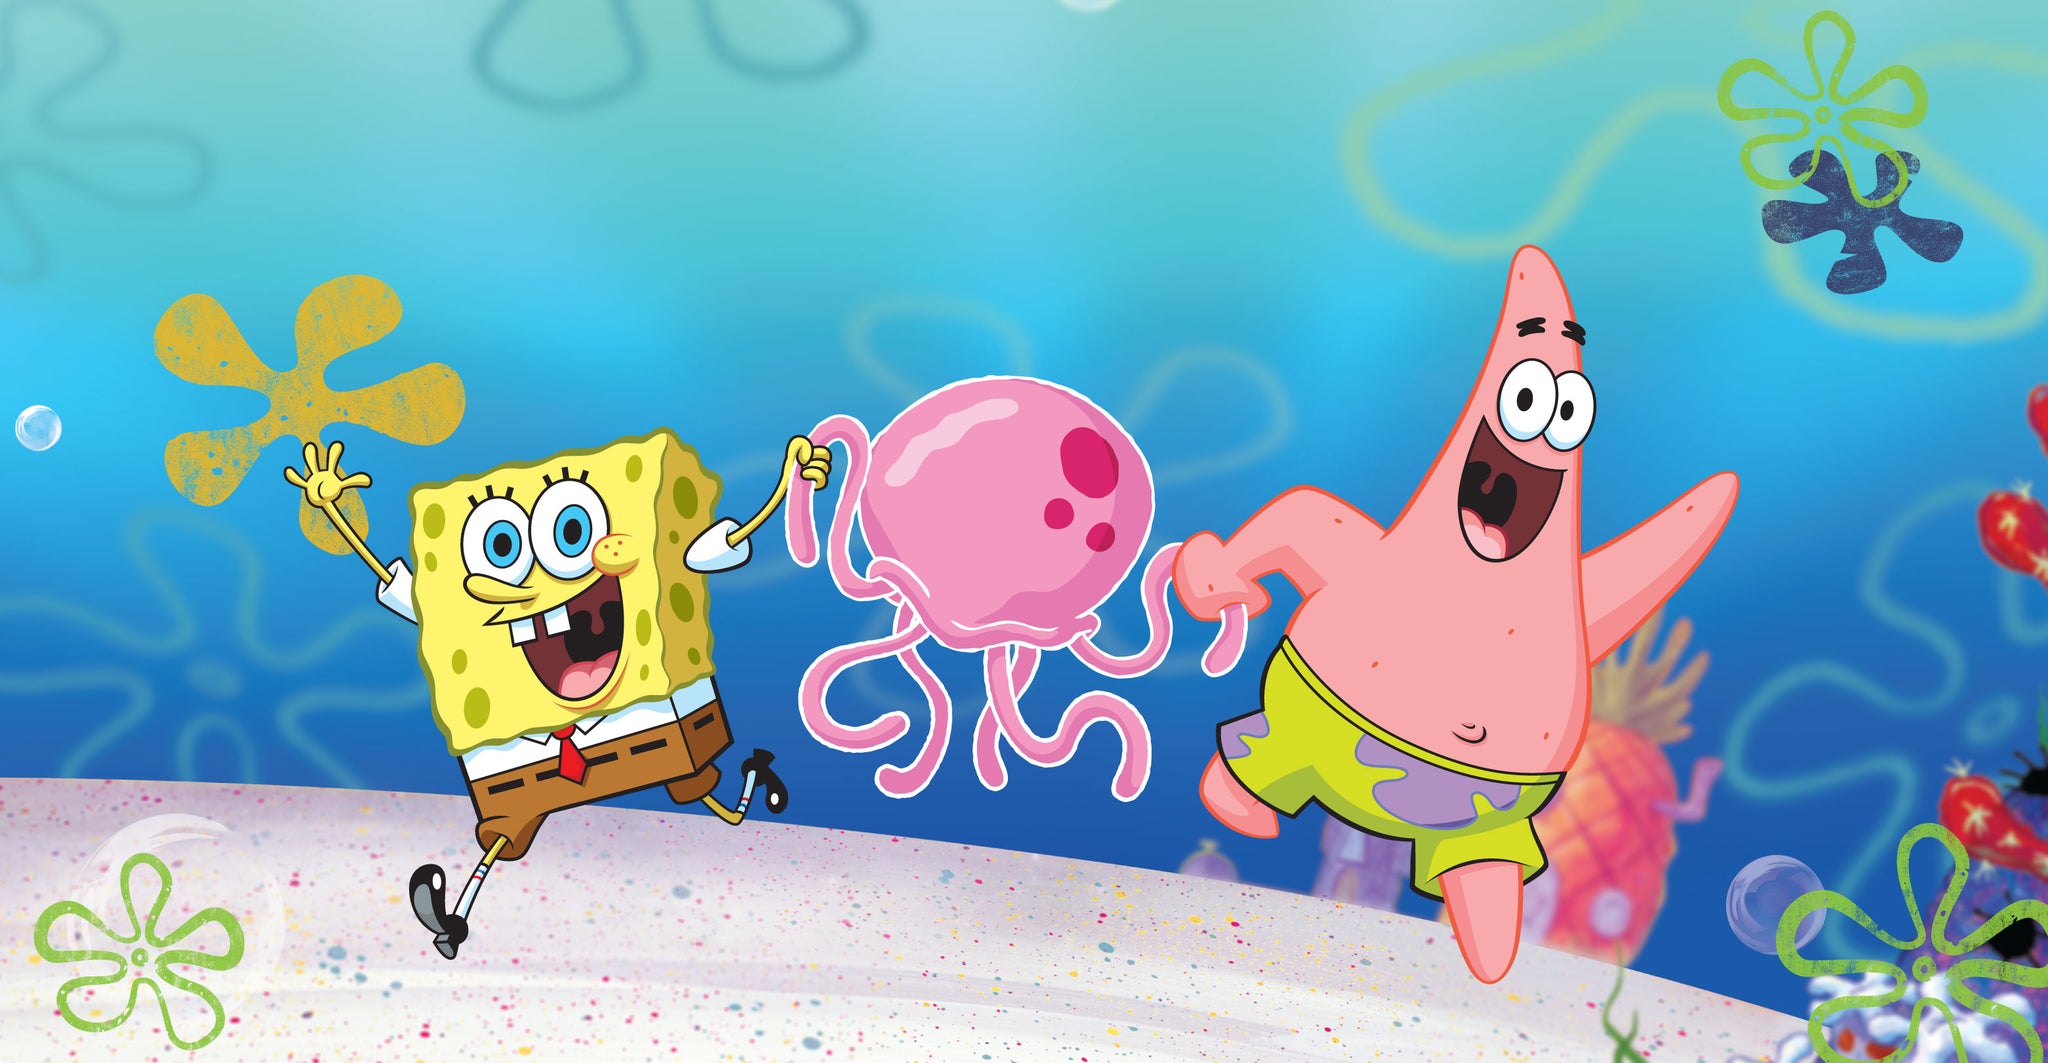 Are you ready? SpongeBob SquarePants is here!